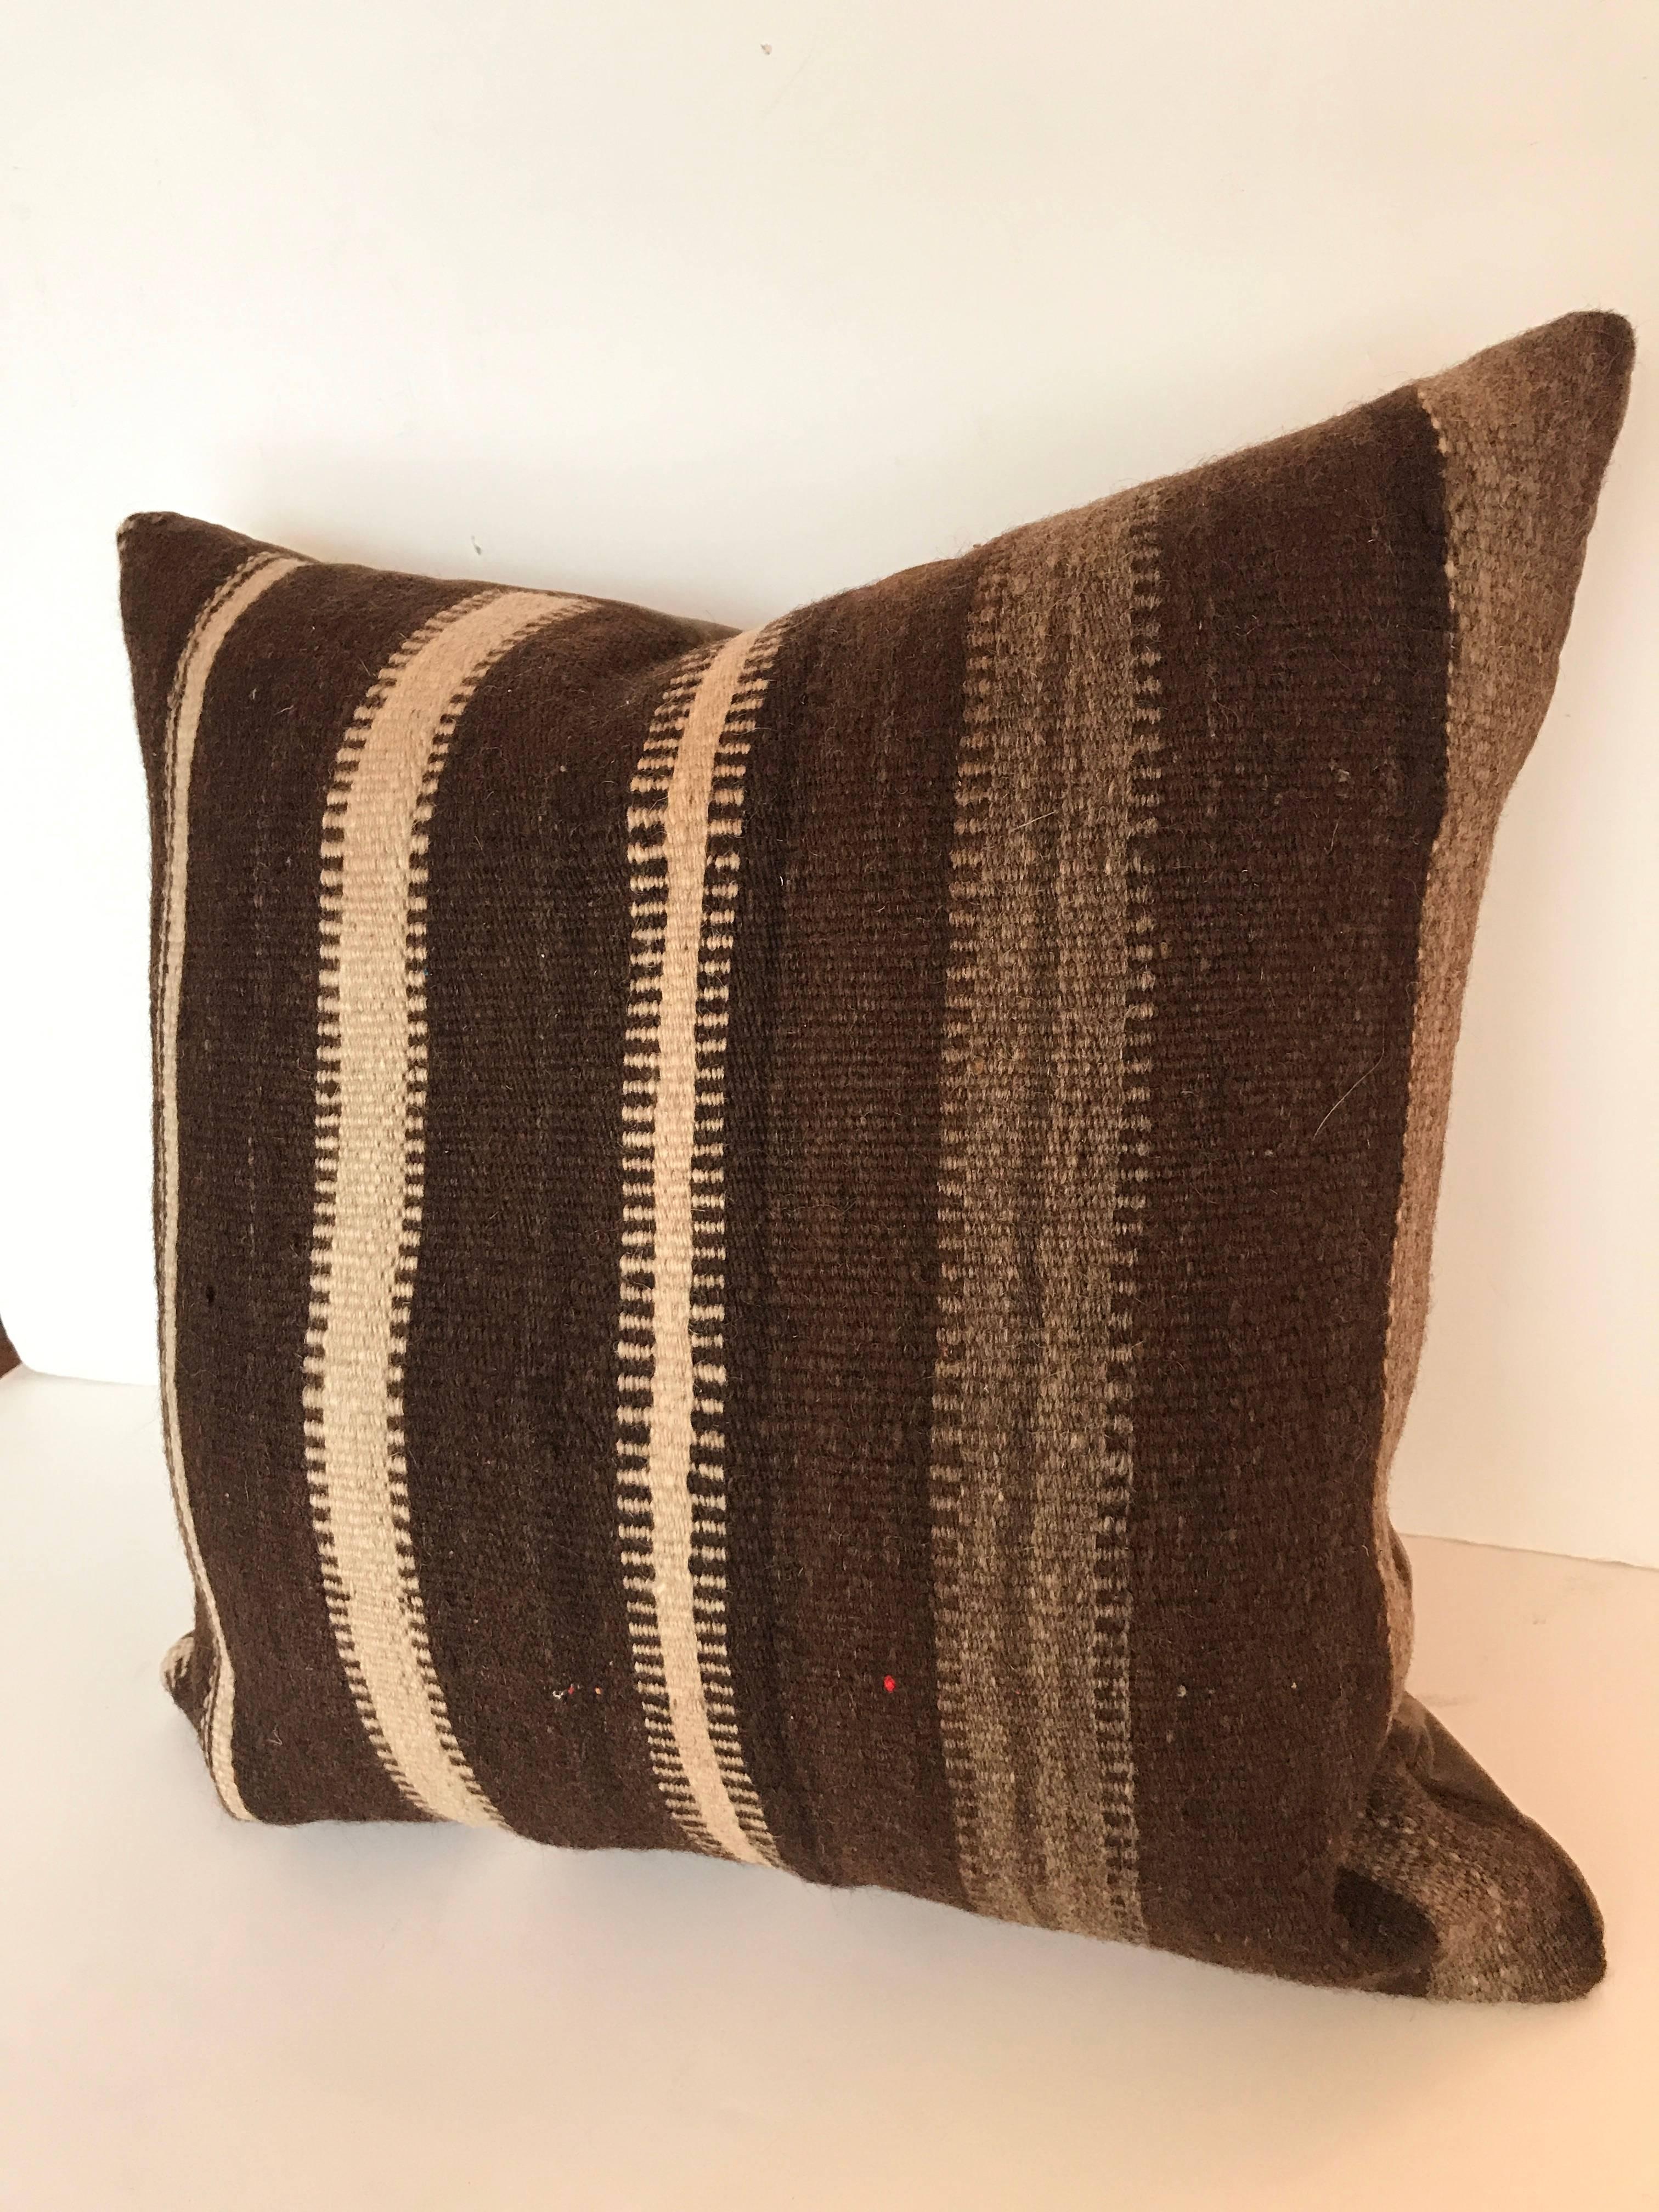 Custom pillow cut from a hand loomed wool Moroccan Ourika rug, high Atlas Mountains. Wool is soft and lustrous with all natural colors. Pillow is backed in velvet, filled with an insert of 50/50 down and feathers and hand-sewn closed. 